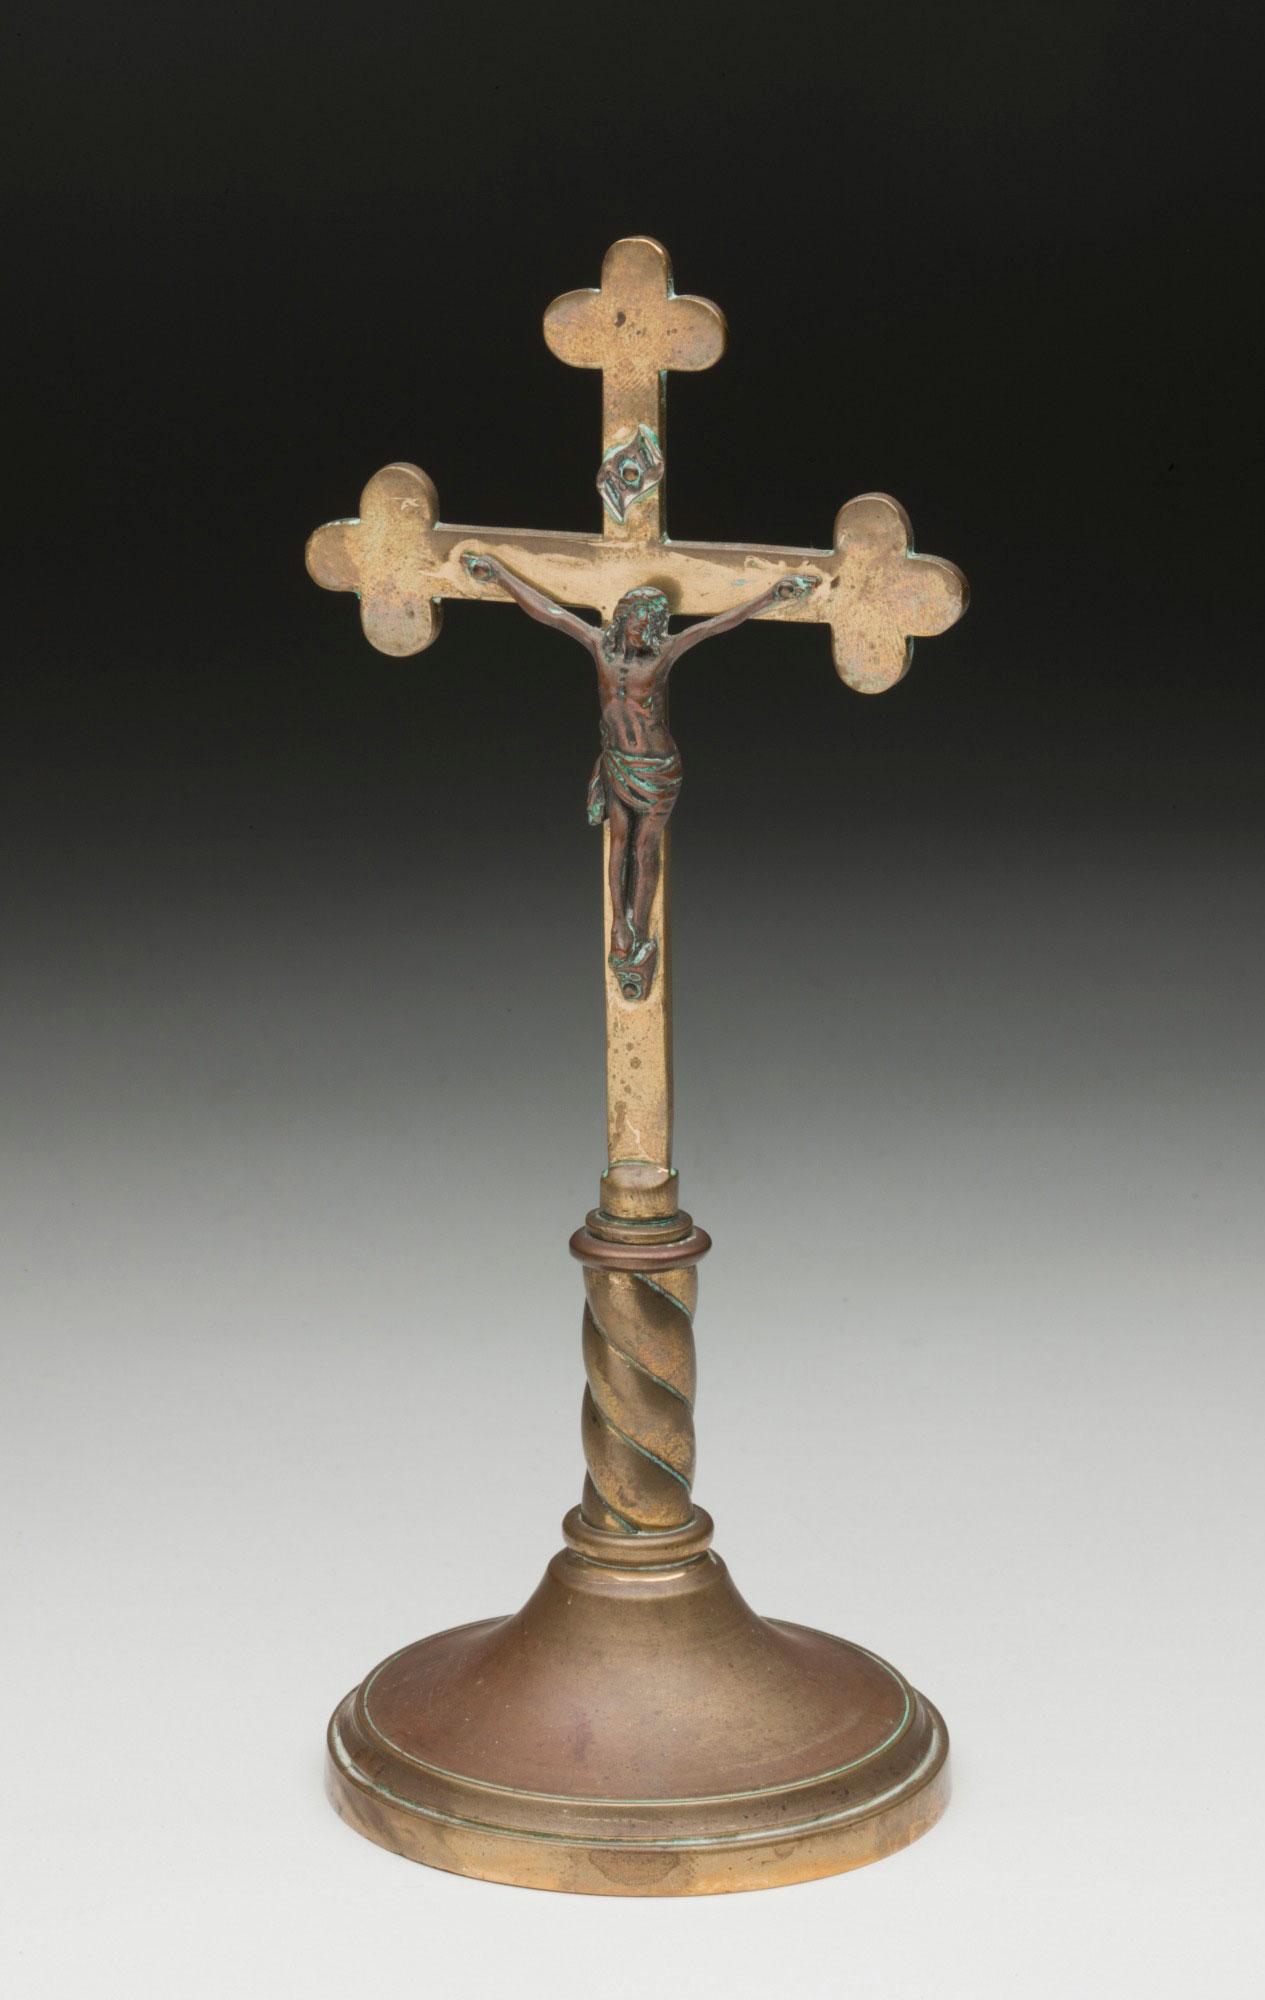 Crucifix on stand which belonged to Janice Konstantinidis, one of the ‘Forgotten Australians’.